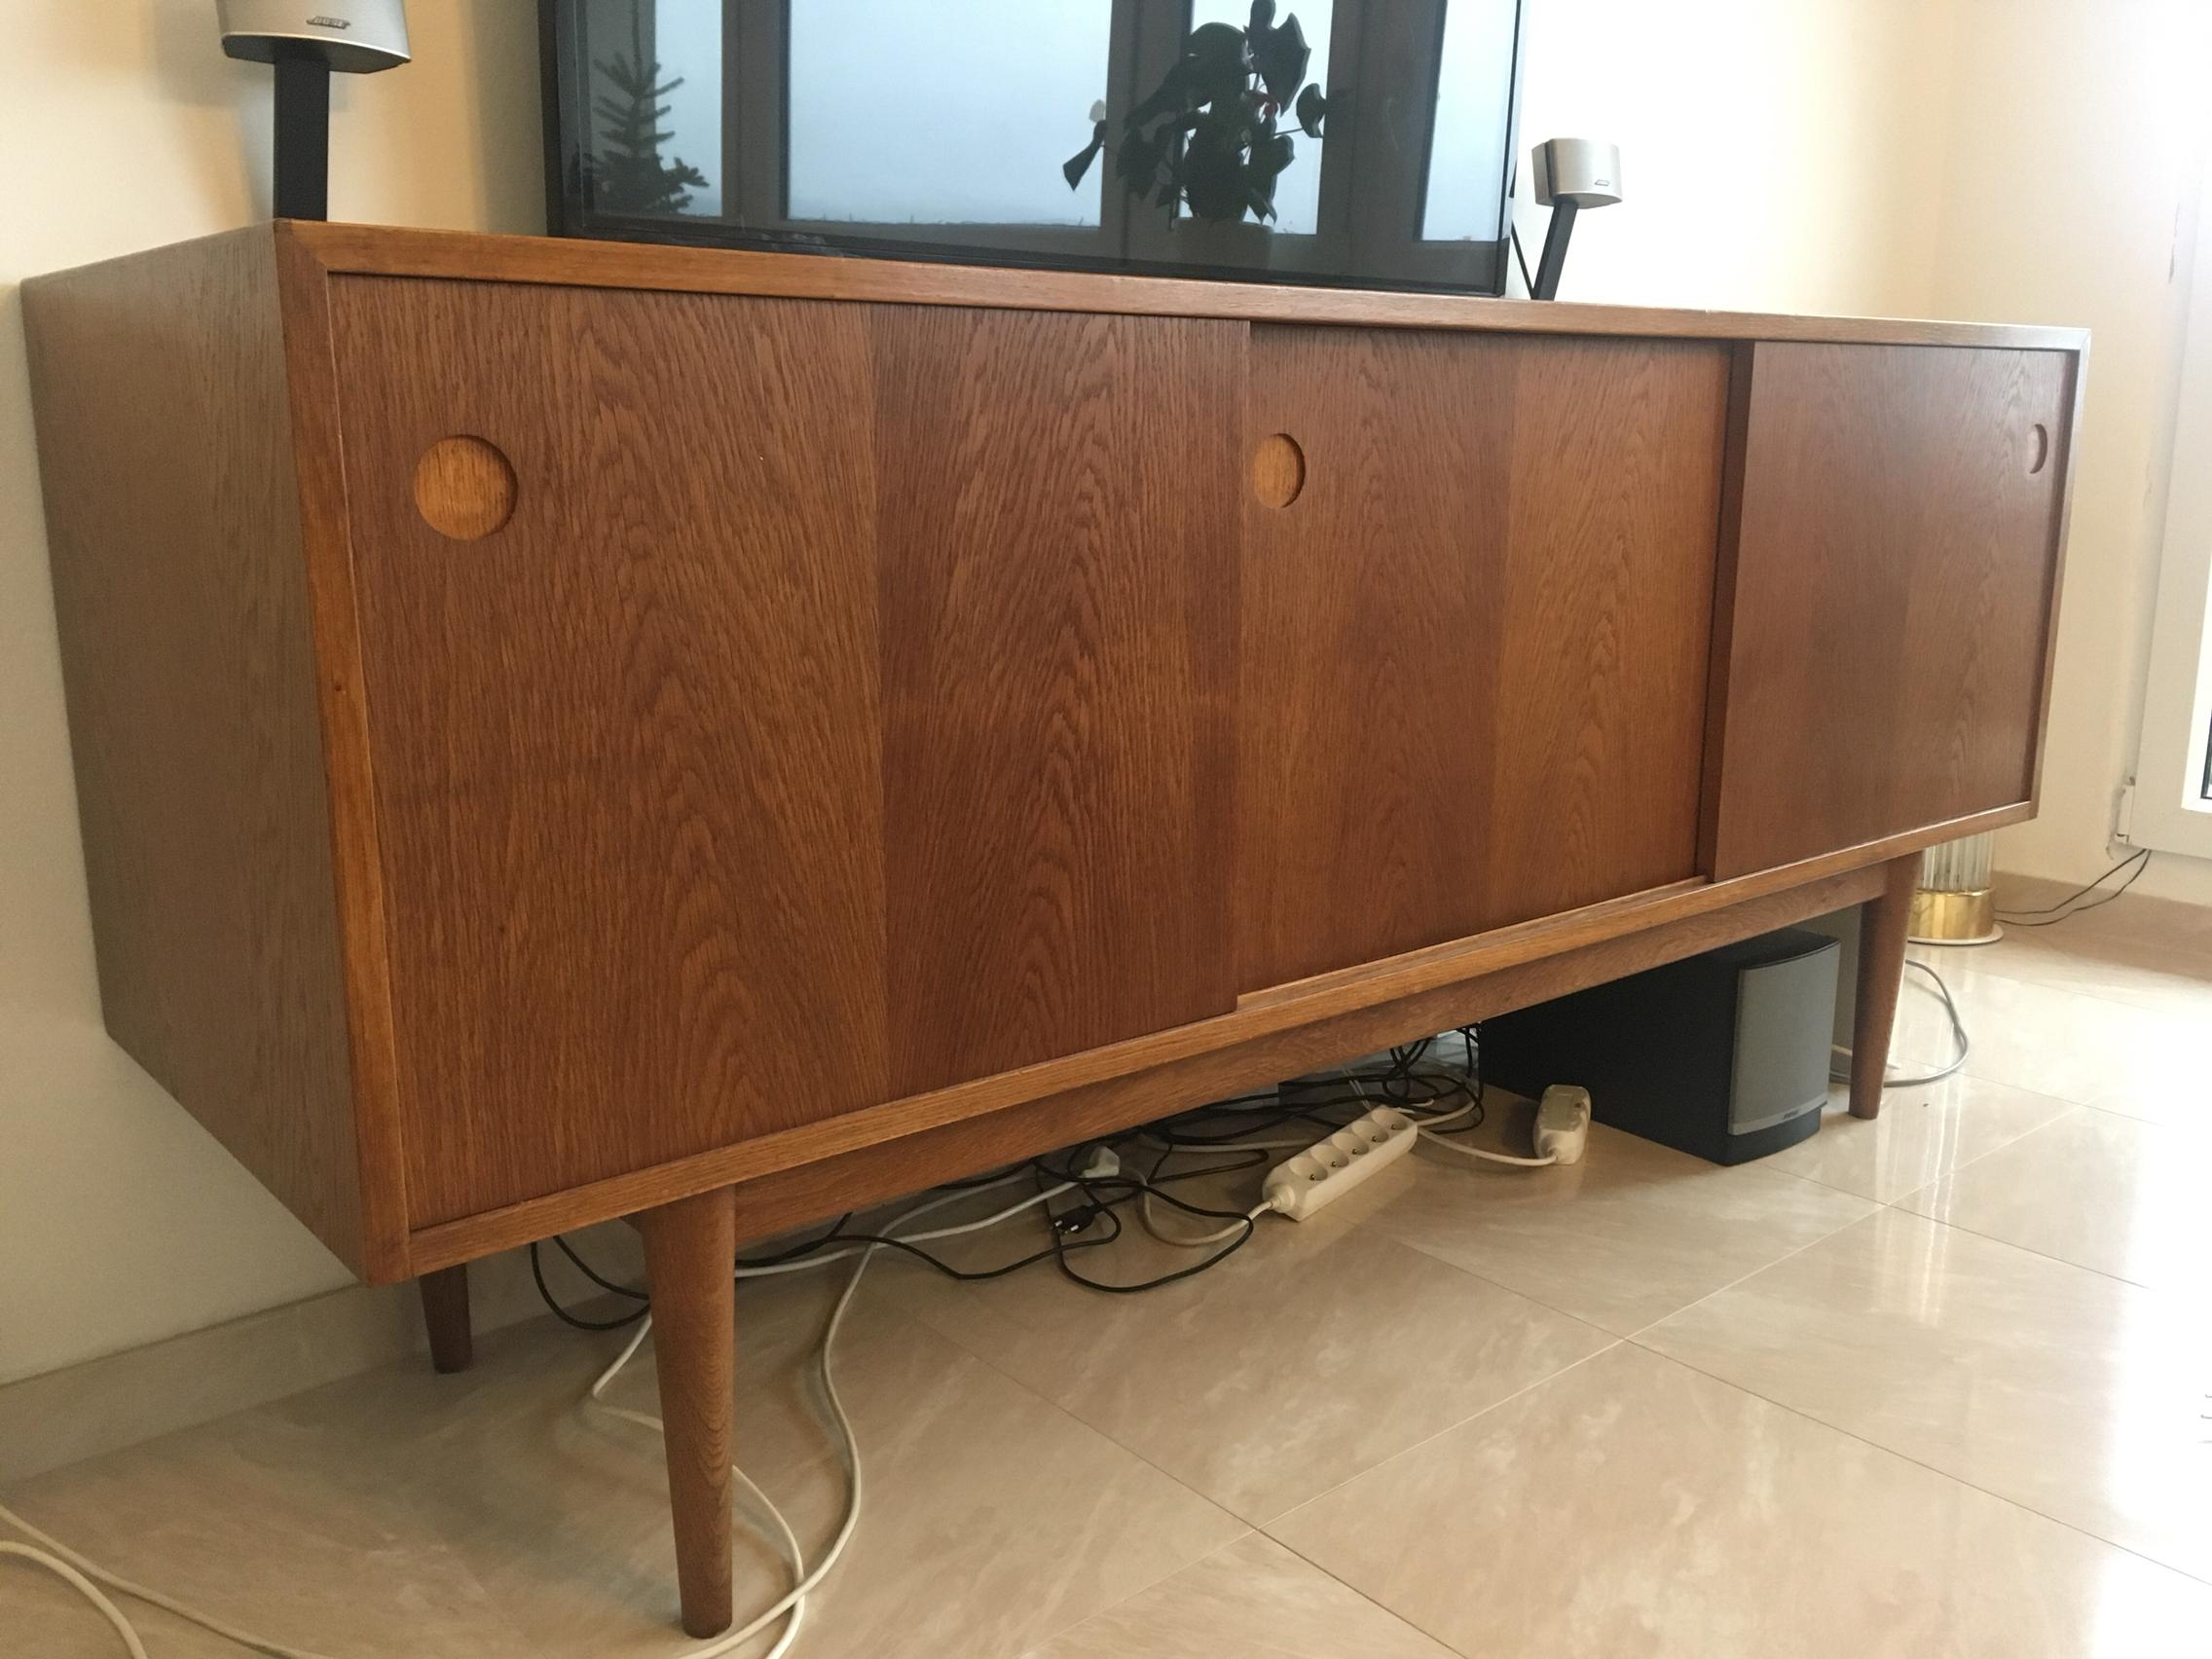 - 1960
- Denmark
- Whole sideboard is made ow massive wood, no vaneer
- Profesionally restored
- Perfect condtion.